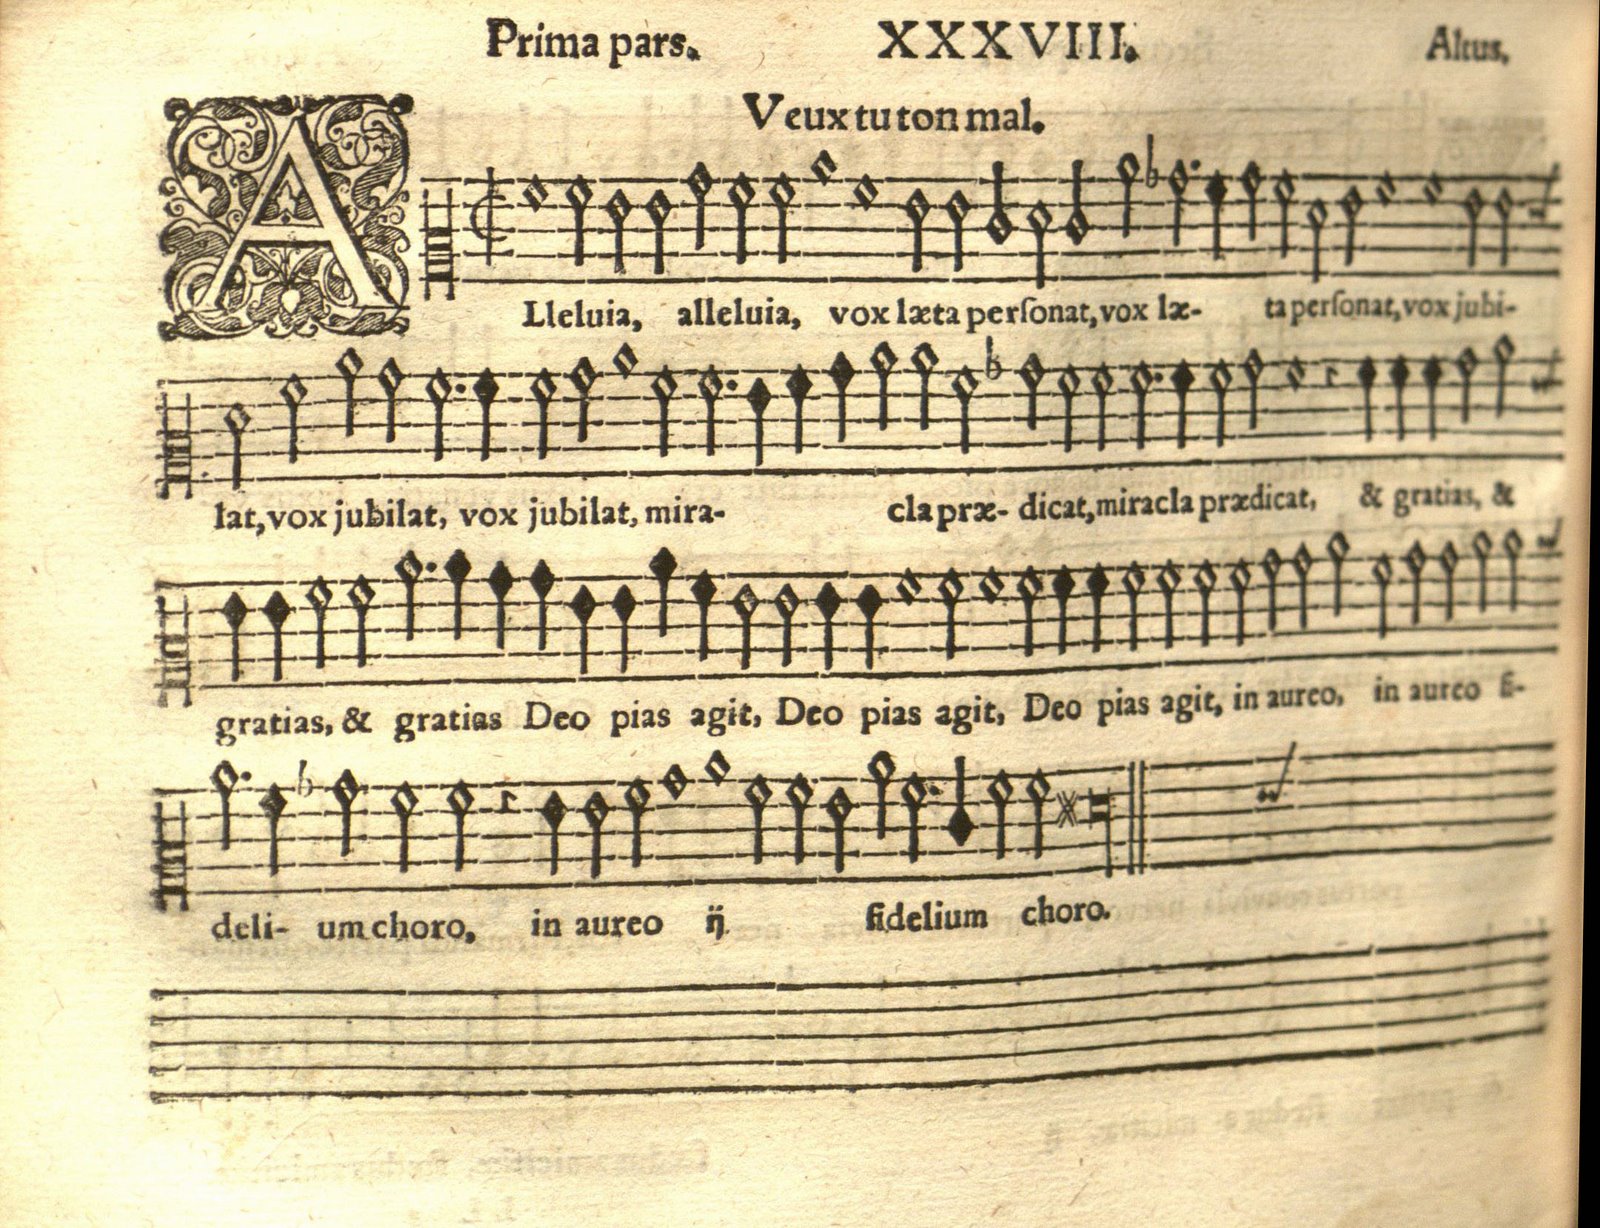 images of pages from these two partbooks showing the Alleluia, vox laeta with its original French title identifying its secular roots.